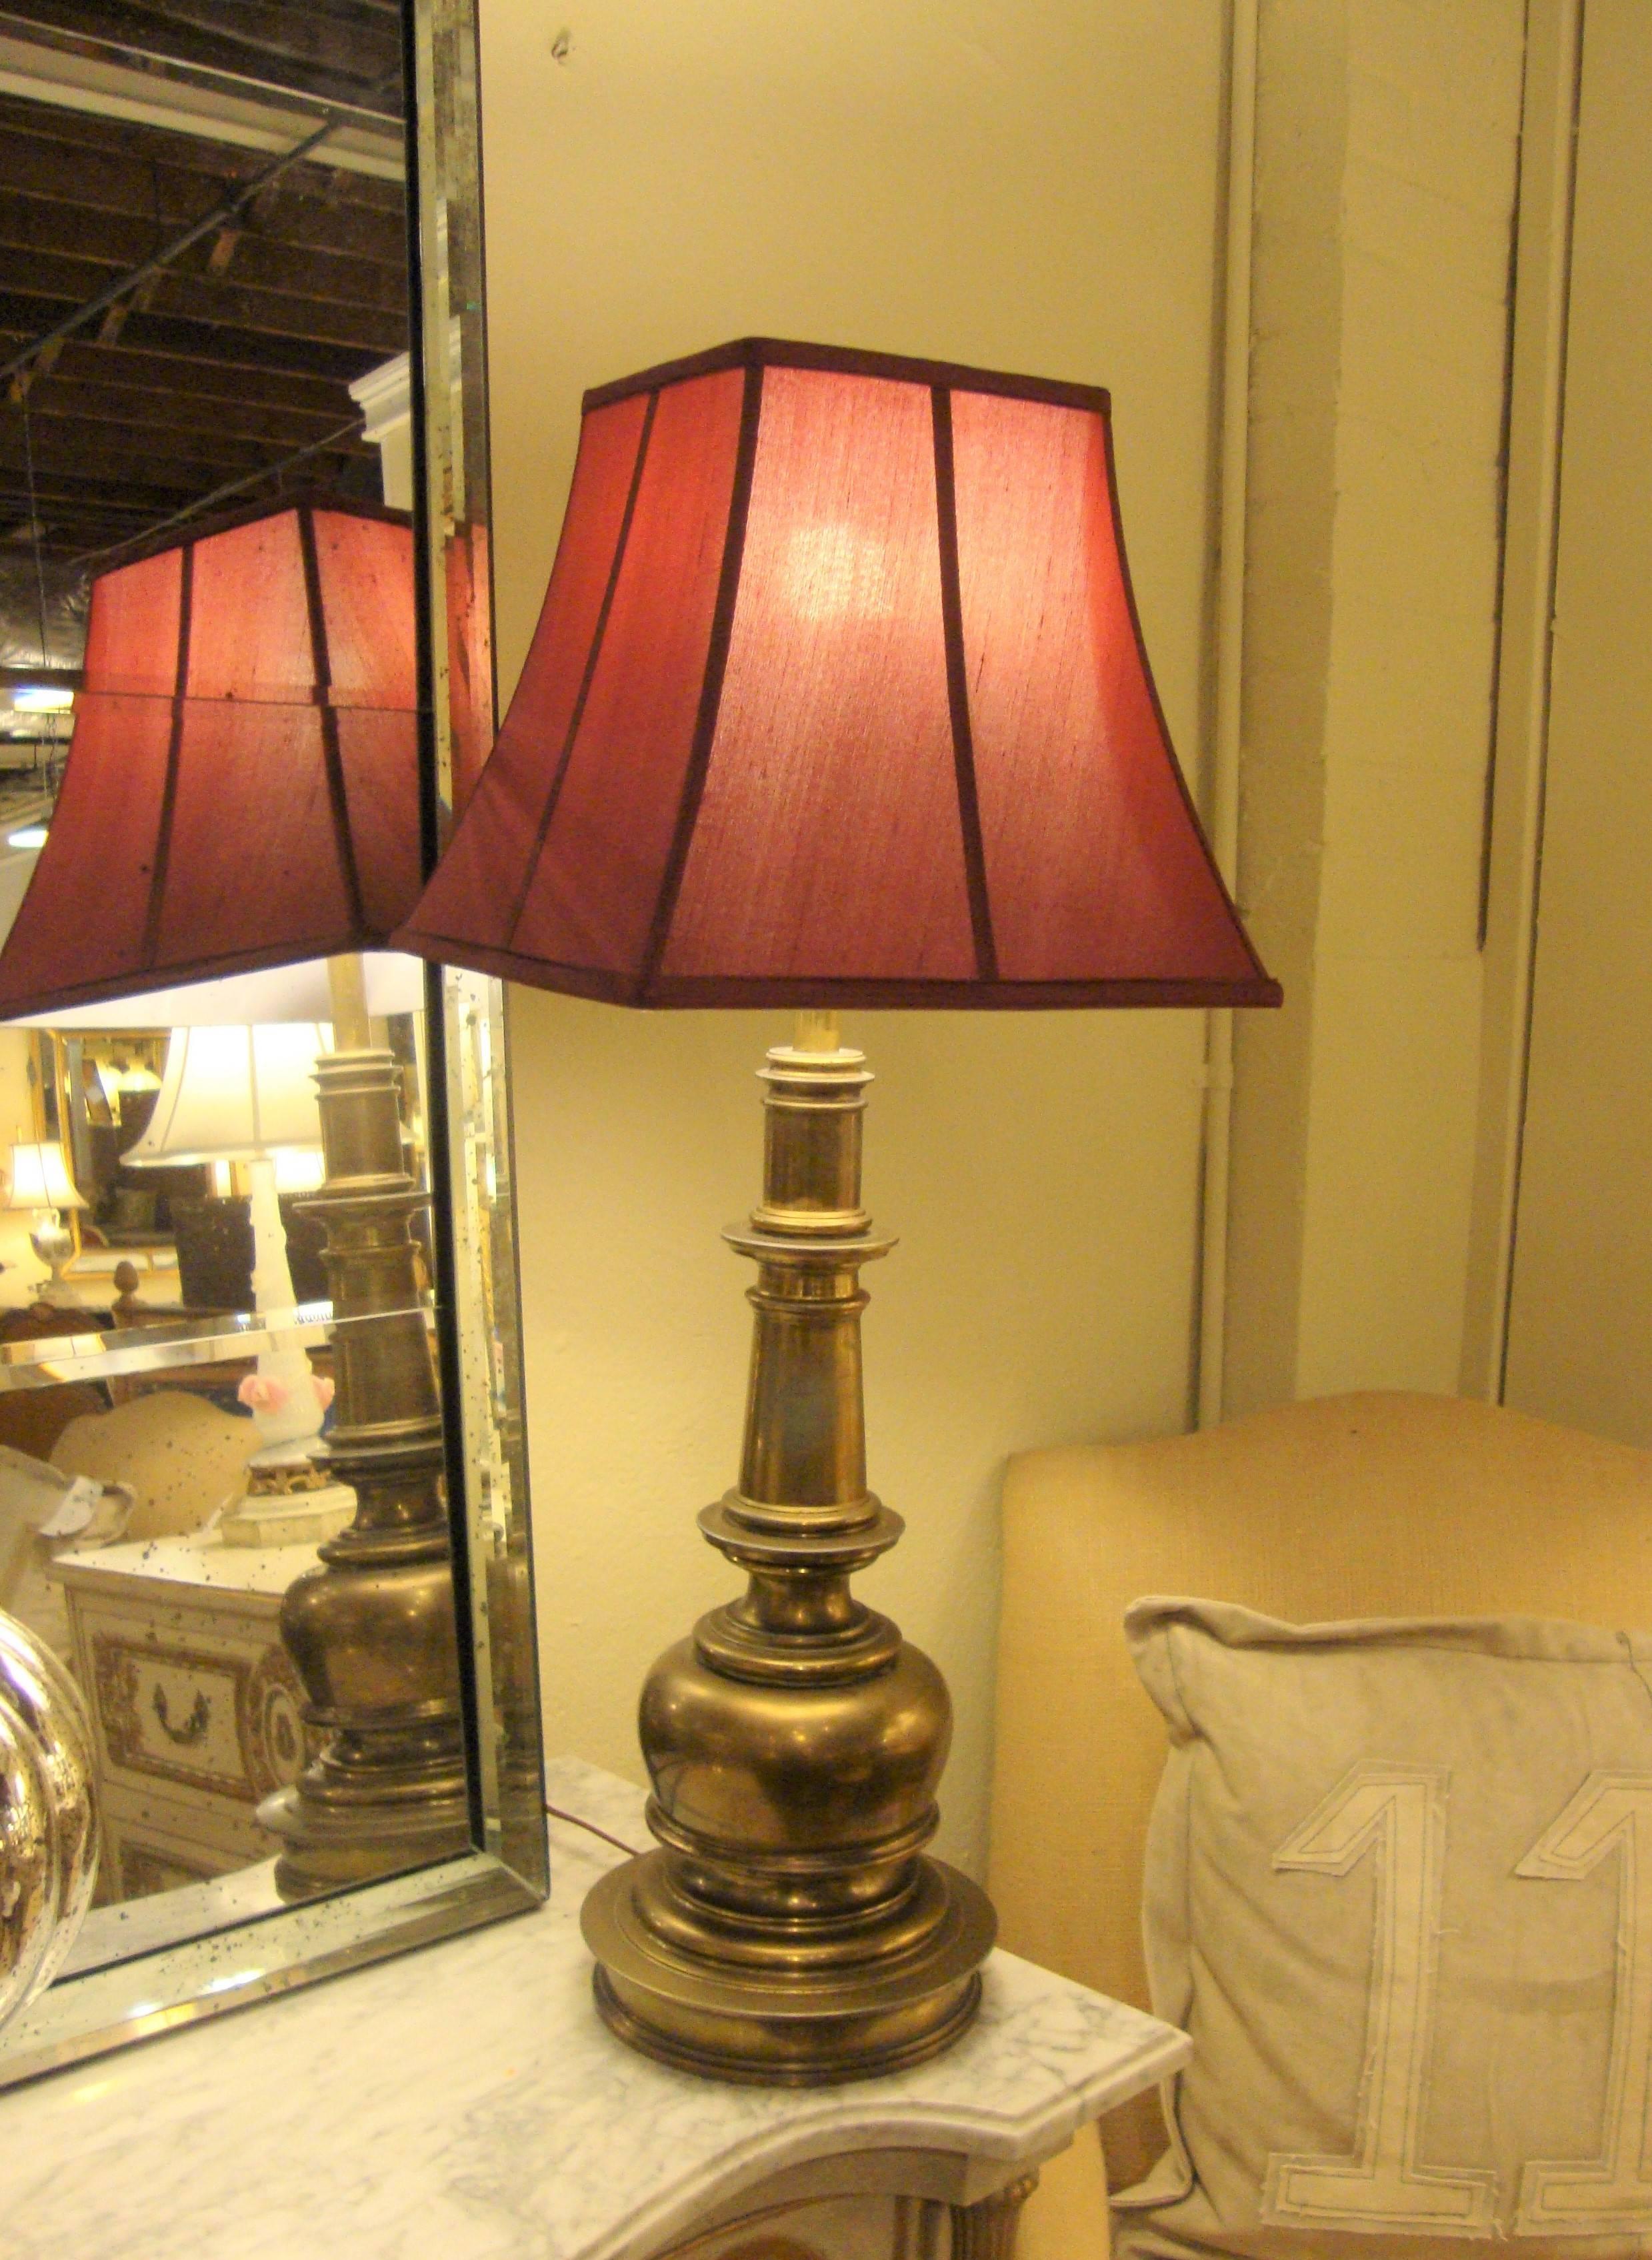 A fine bronze pair of table lamps in the neoclassical fashion. These lamps having a bulbous column center supporting a custom quality pair of lamp shades. The pair are certain to light up any room in the home of office. From a Massapequa home of a